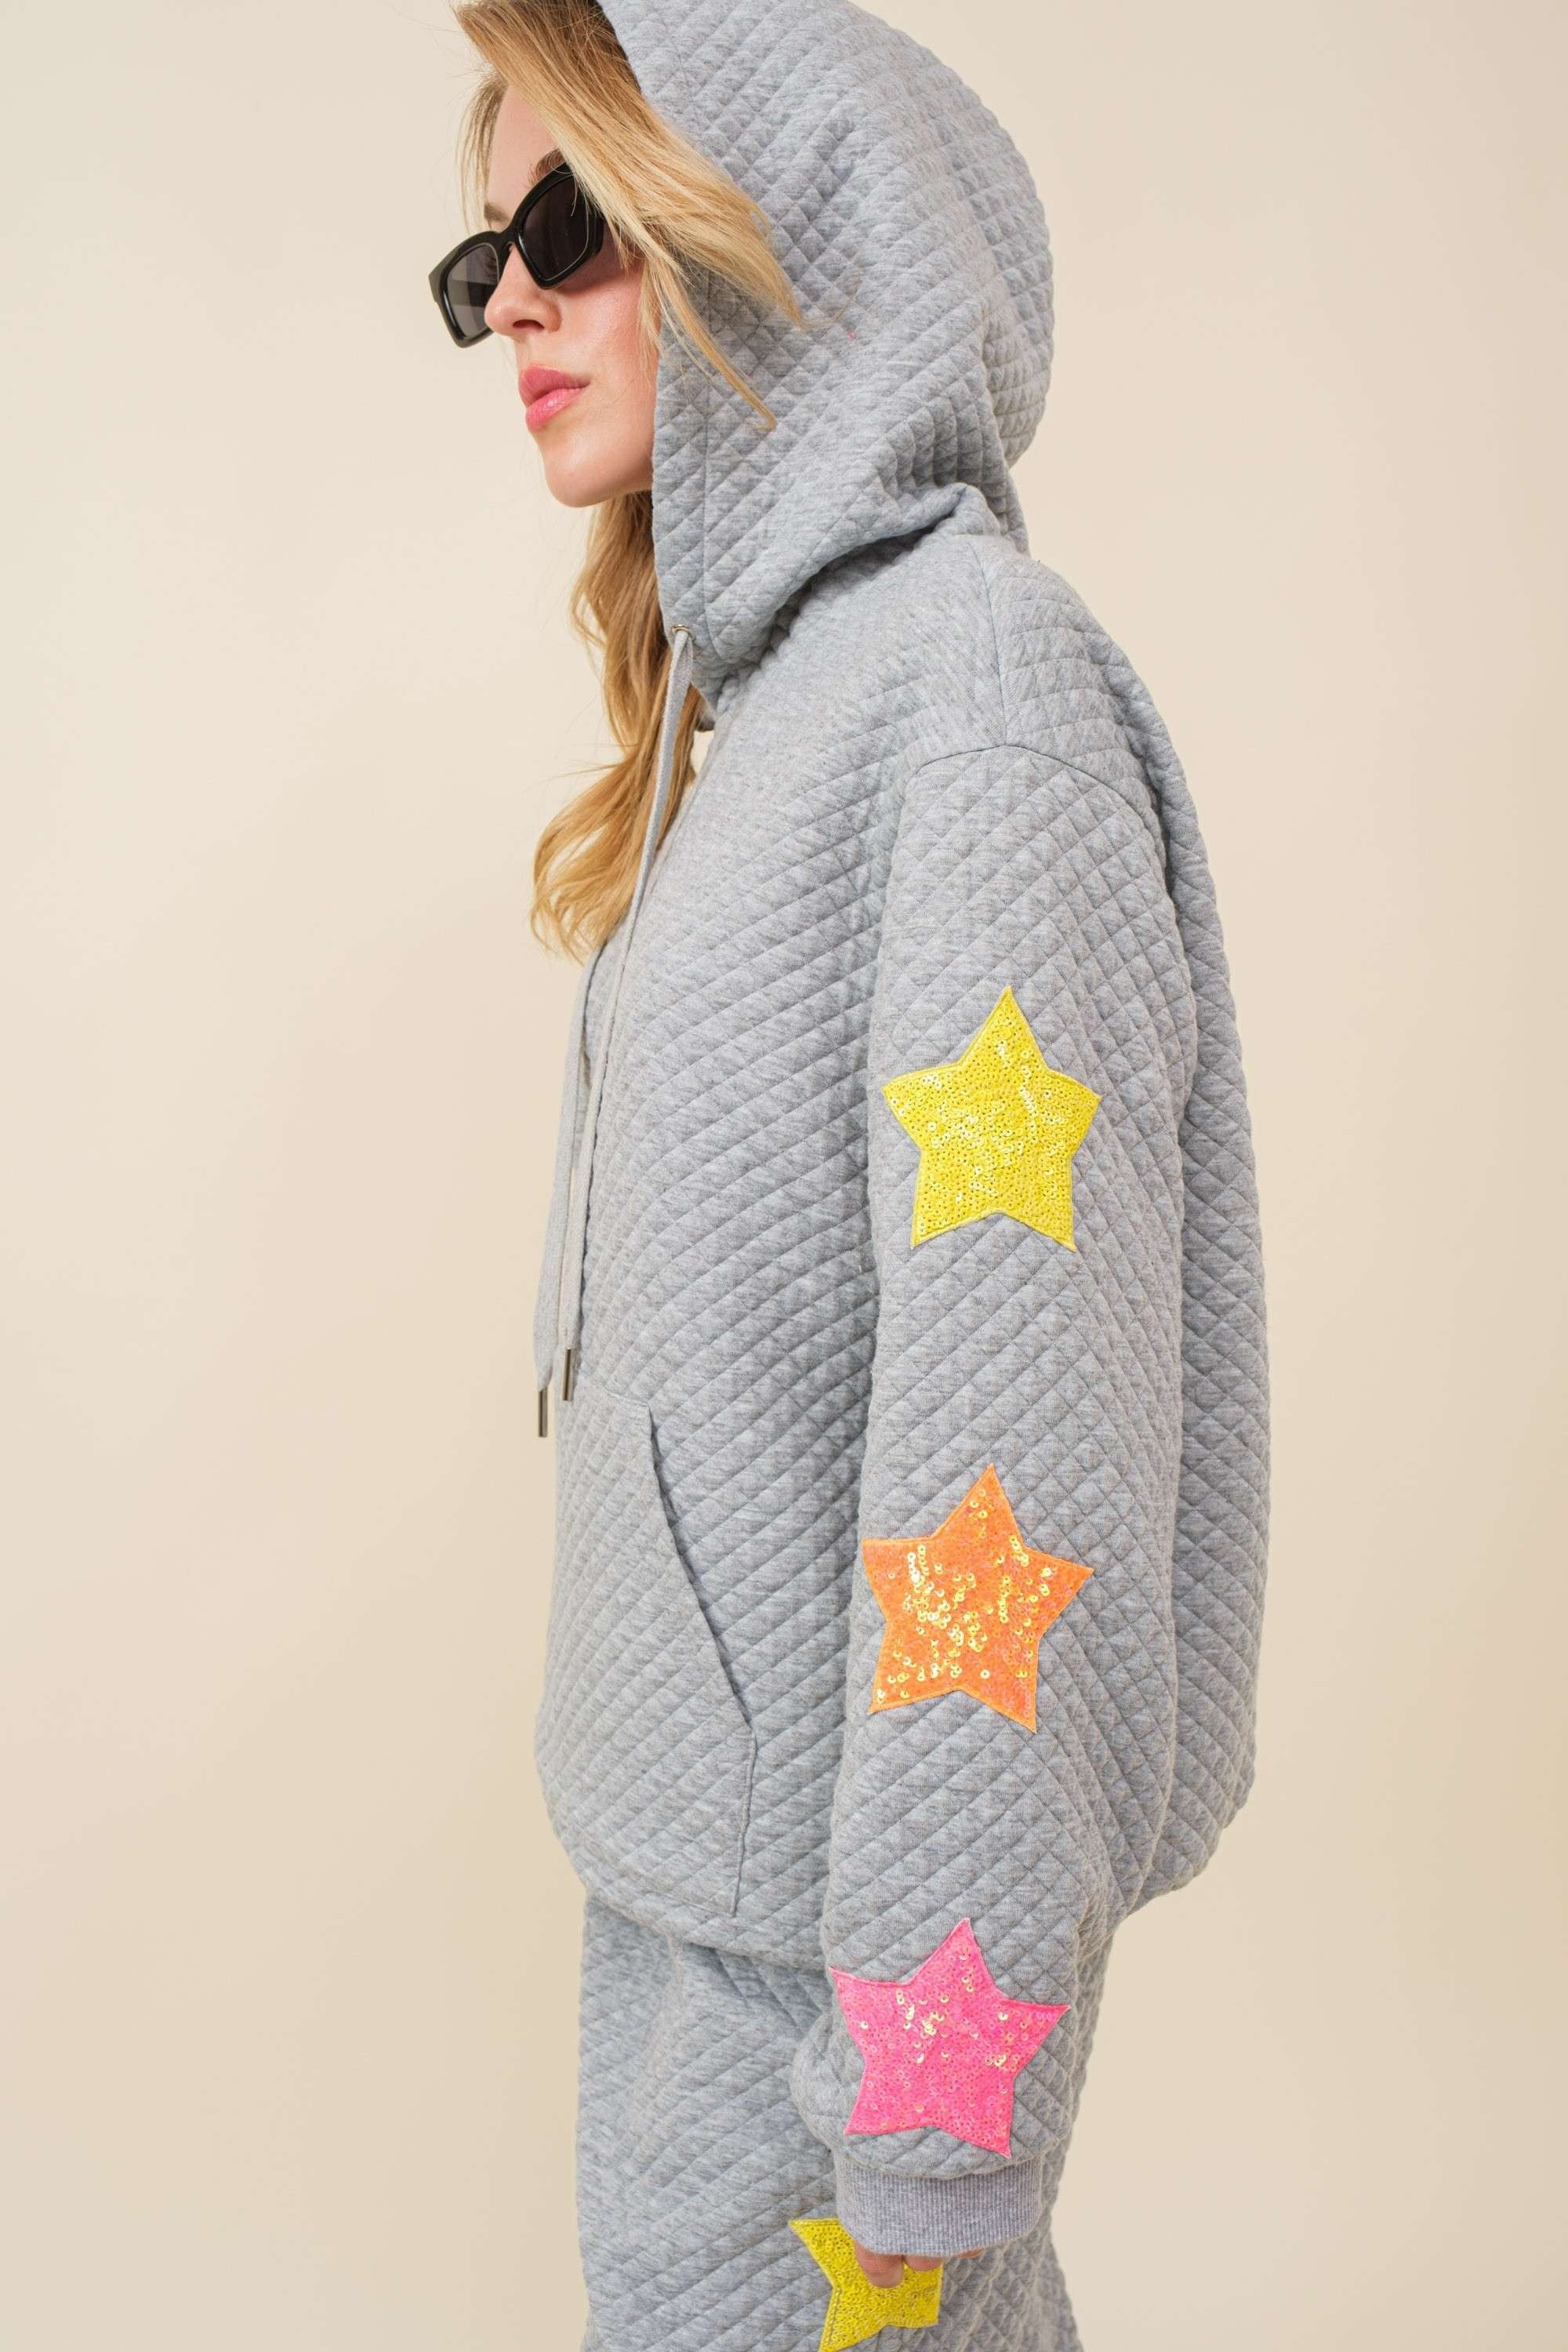 The ‘Star Of The Show Hoodie’